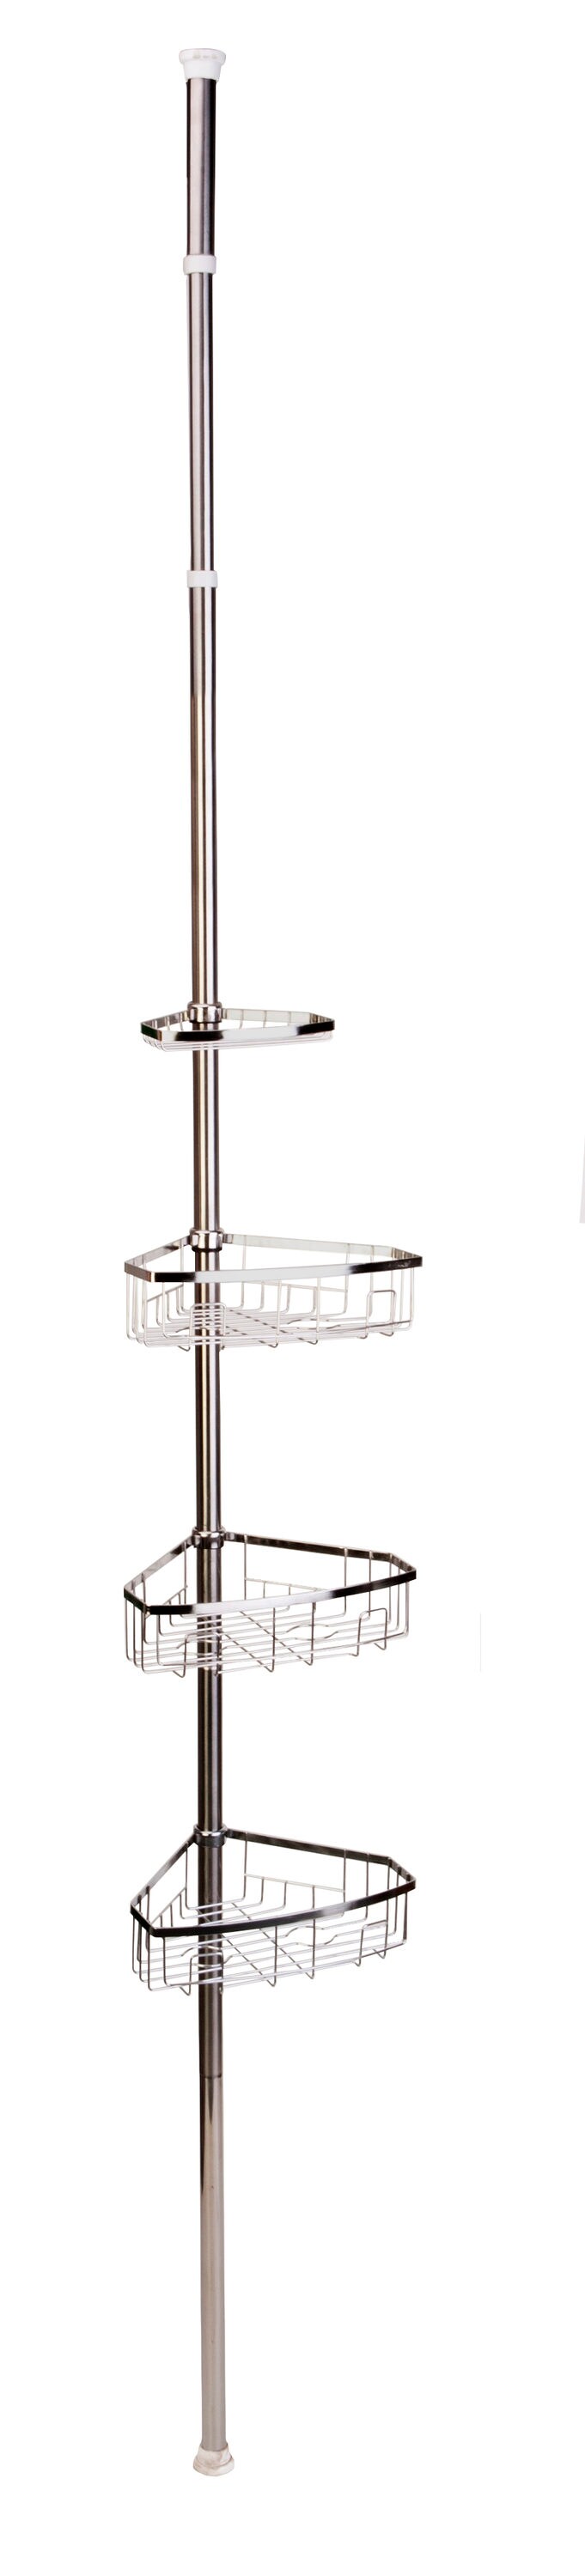 Style Selections Satin Nickel Steel 4-Shelf Tension Pole Freestanding Shower  Caddy 10.5-in x 8.5-in at